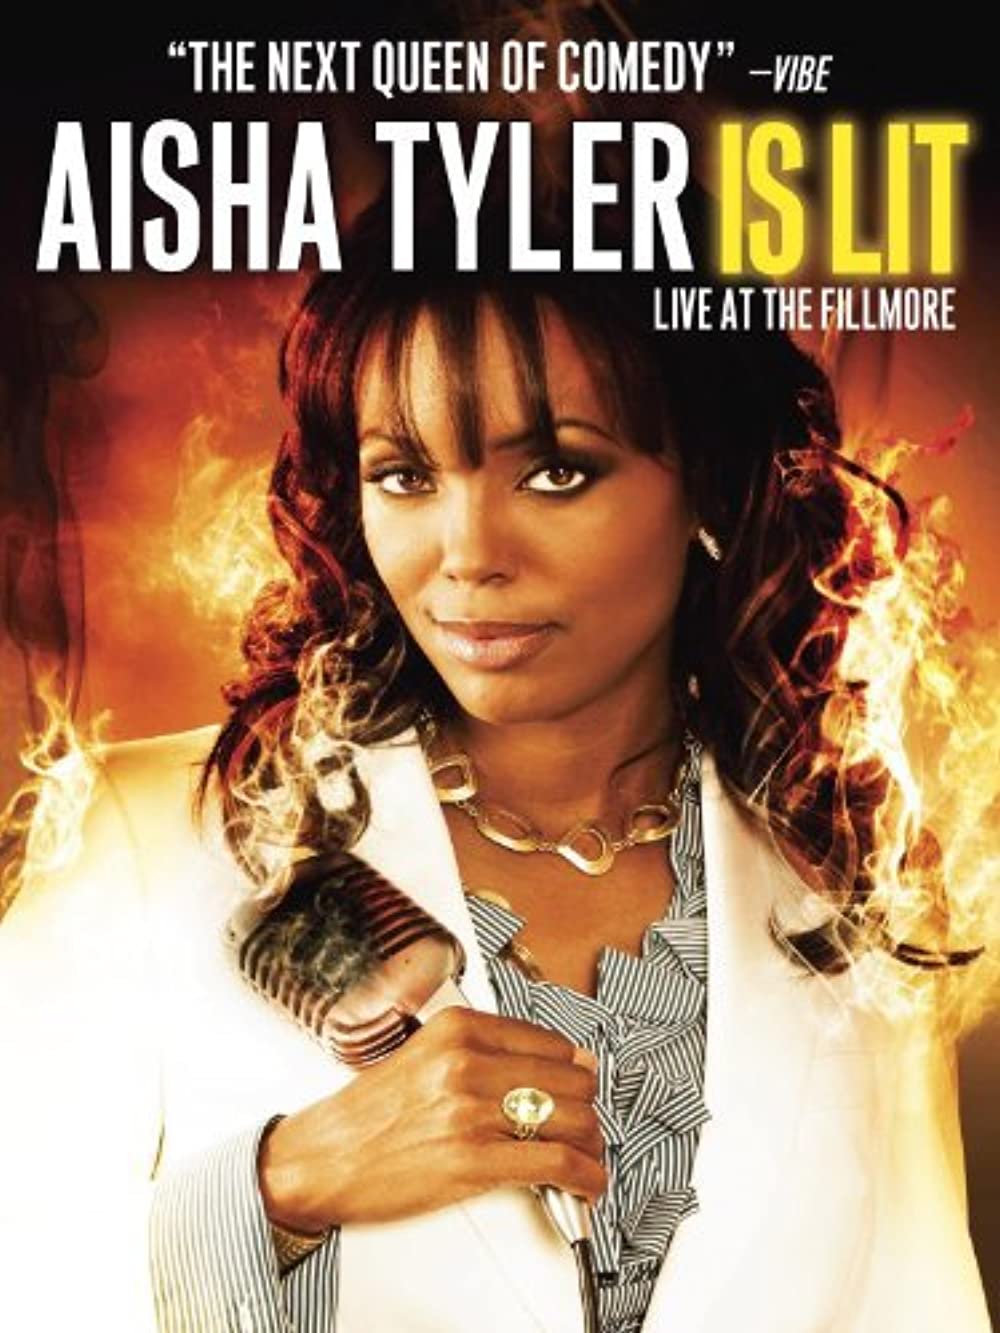 Download Aisha Tyler Is Lit: Live at the Fillmore Movie | Aisha Tyler Is Lit: Live At The Fillmore Movie